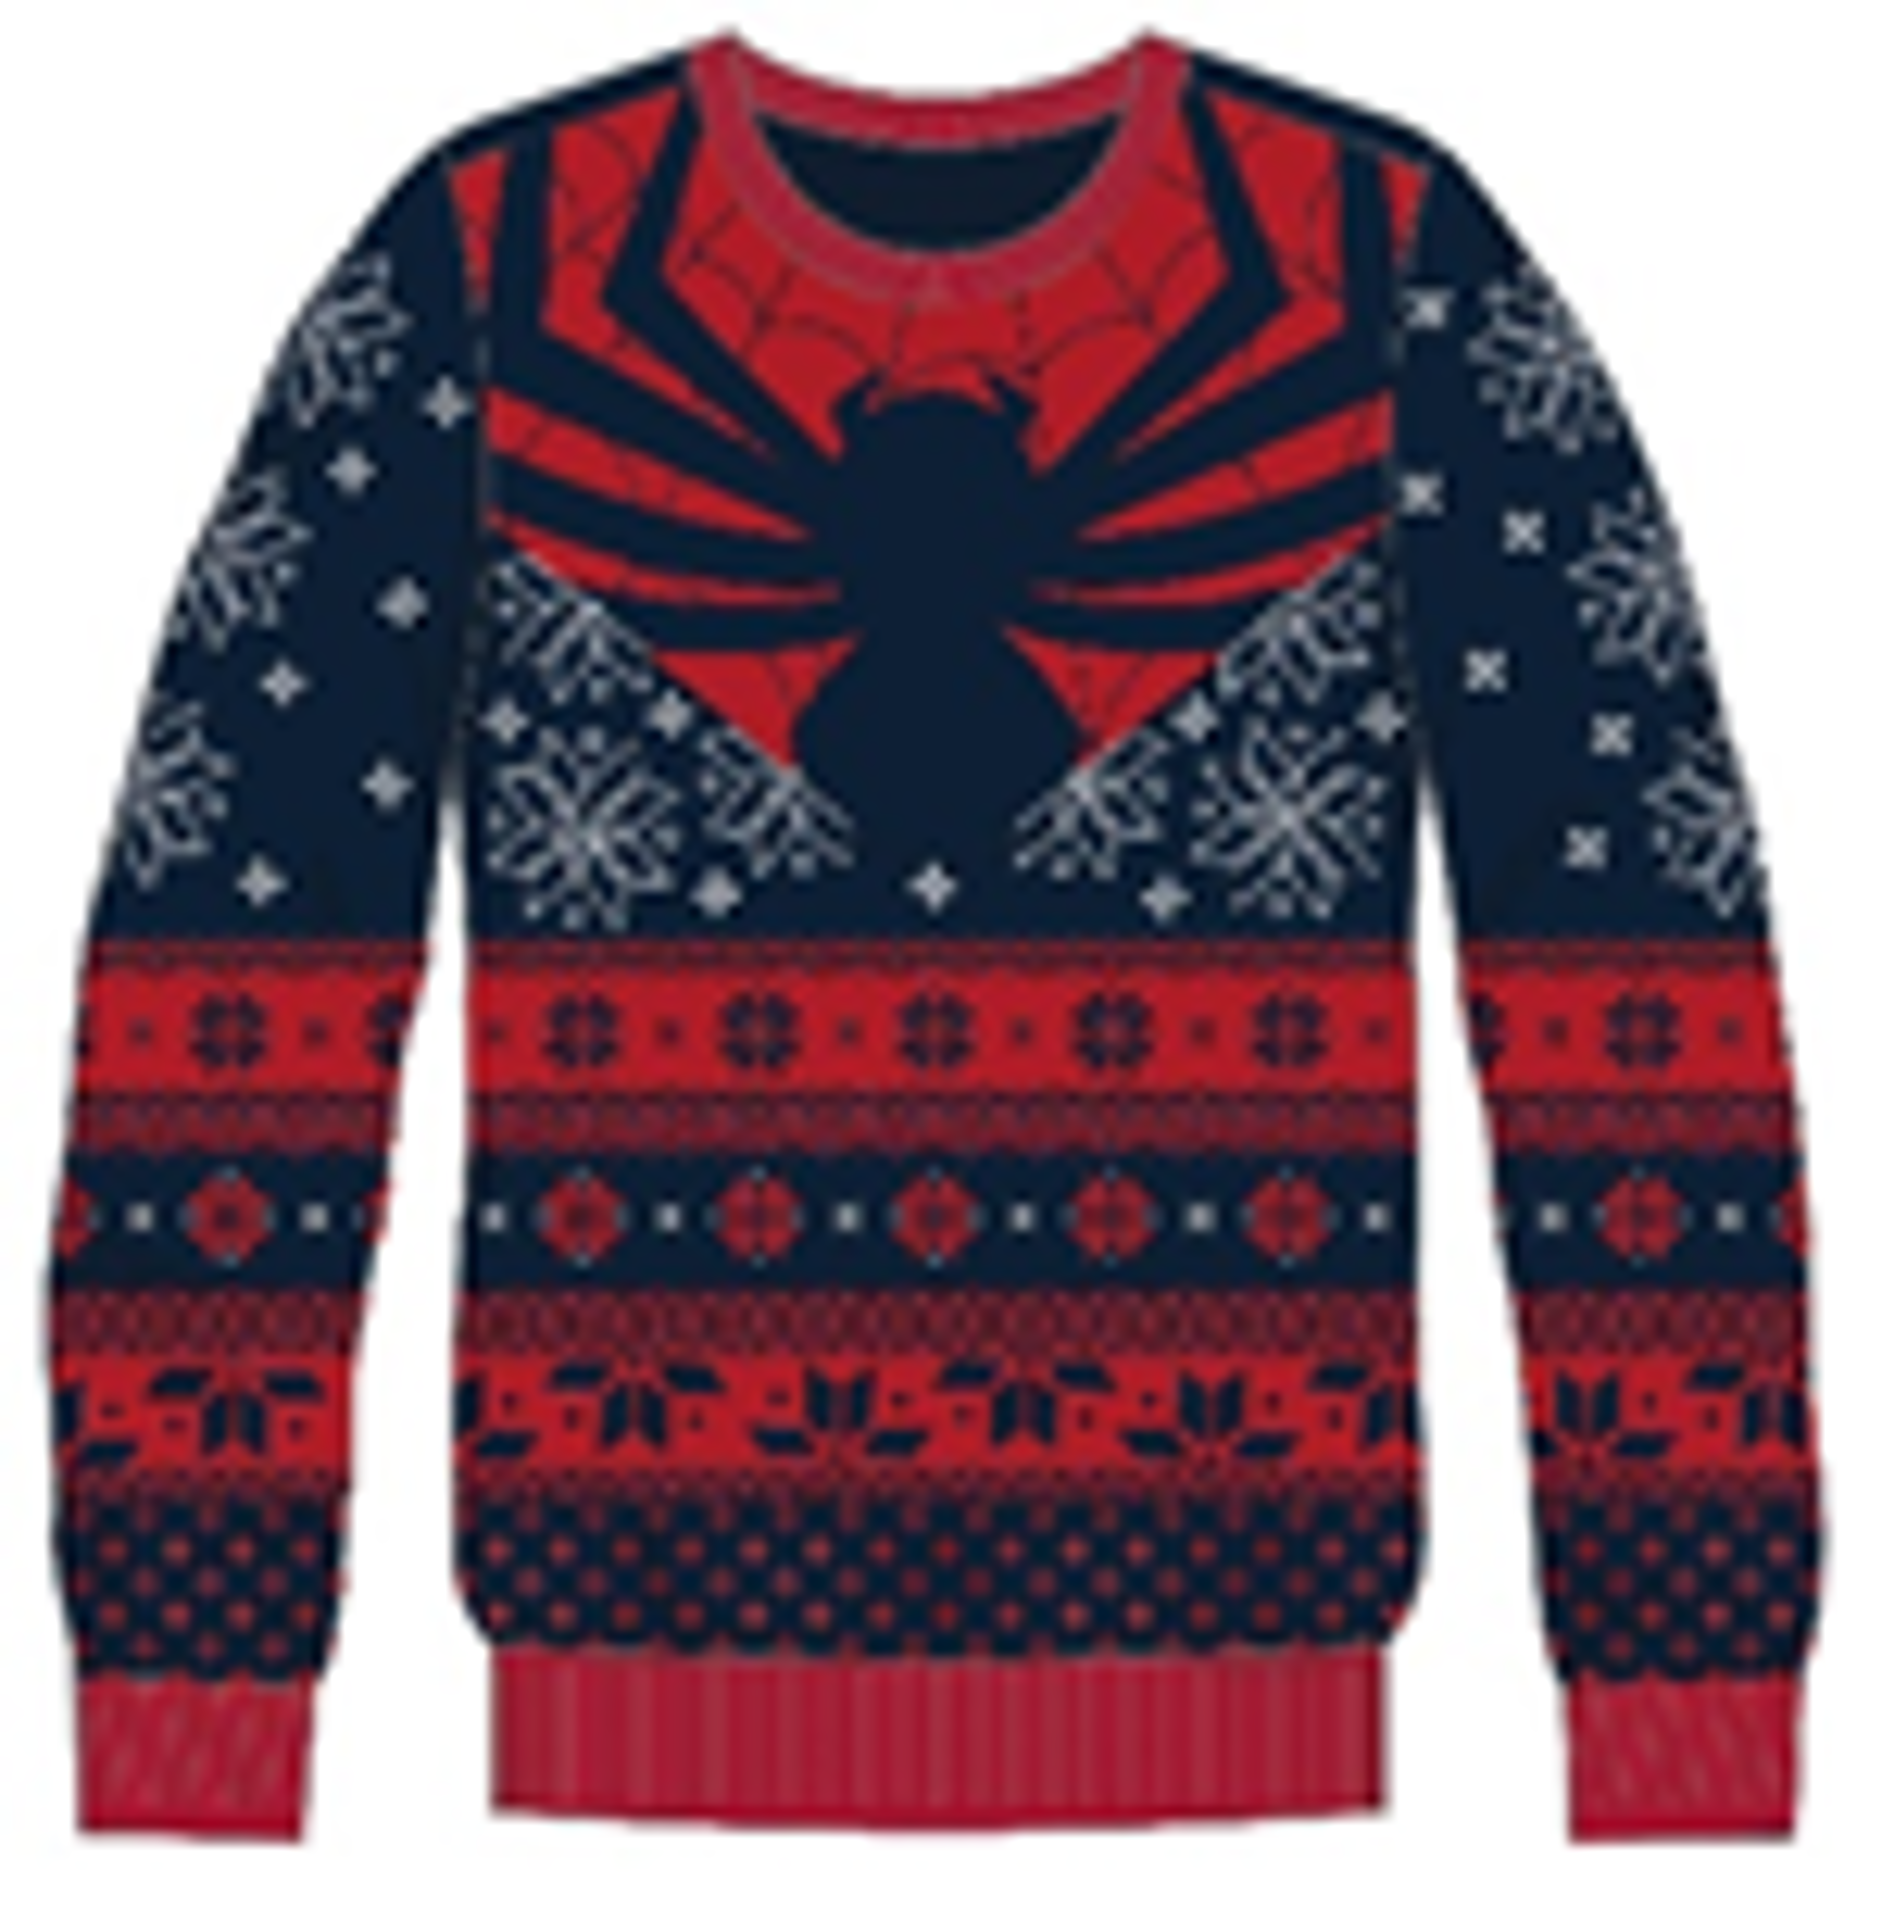 Marvel - Ugly Spiderman Christmas Sweater L